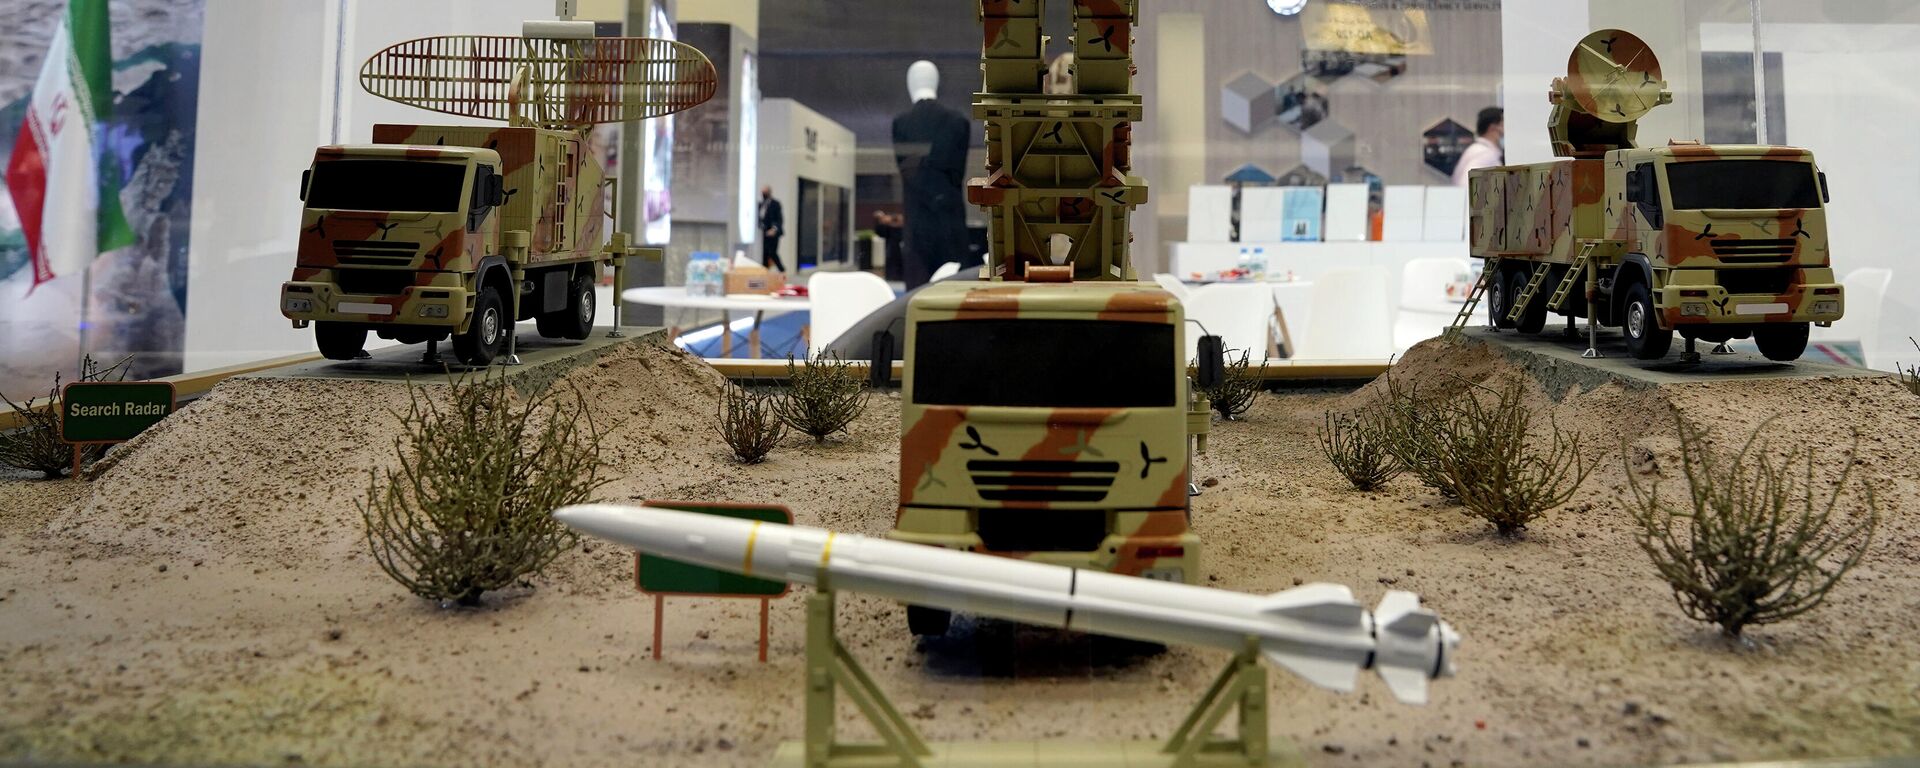 A model of an Iranian Bavar-373 (AD-200) launch system missile is seen at a stand at the DIMDEX exhibition in Doha, Qatar, Wednesday, March 23, 2022. Iran, under sweeping economic sanctions, was hawking weapons on Wednesday at a Qatari defense exhibit, a surprising sight at the major conference also showcasing American companies and fighter jets. - Sputnik International, 1920, 16.10.2022